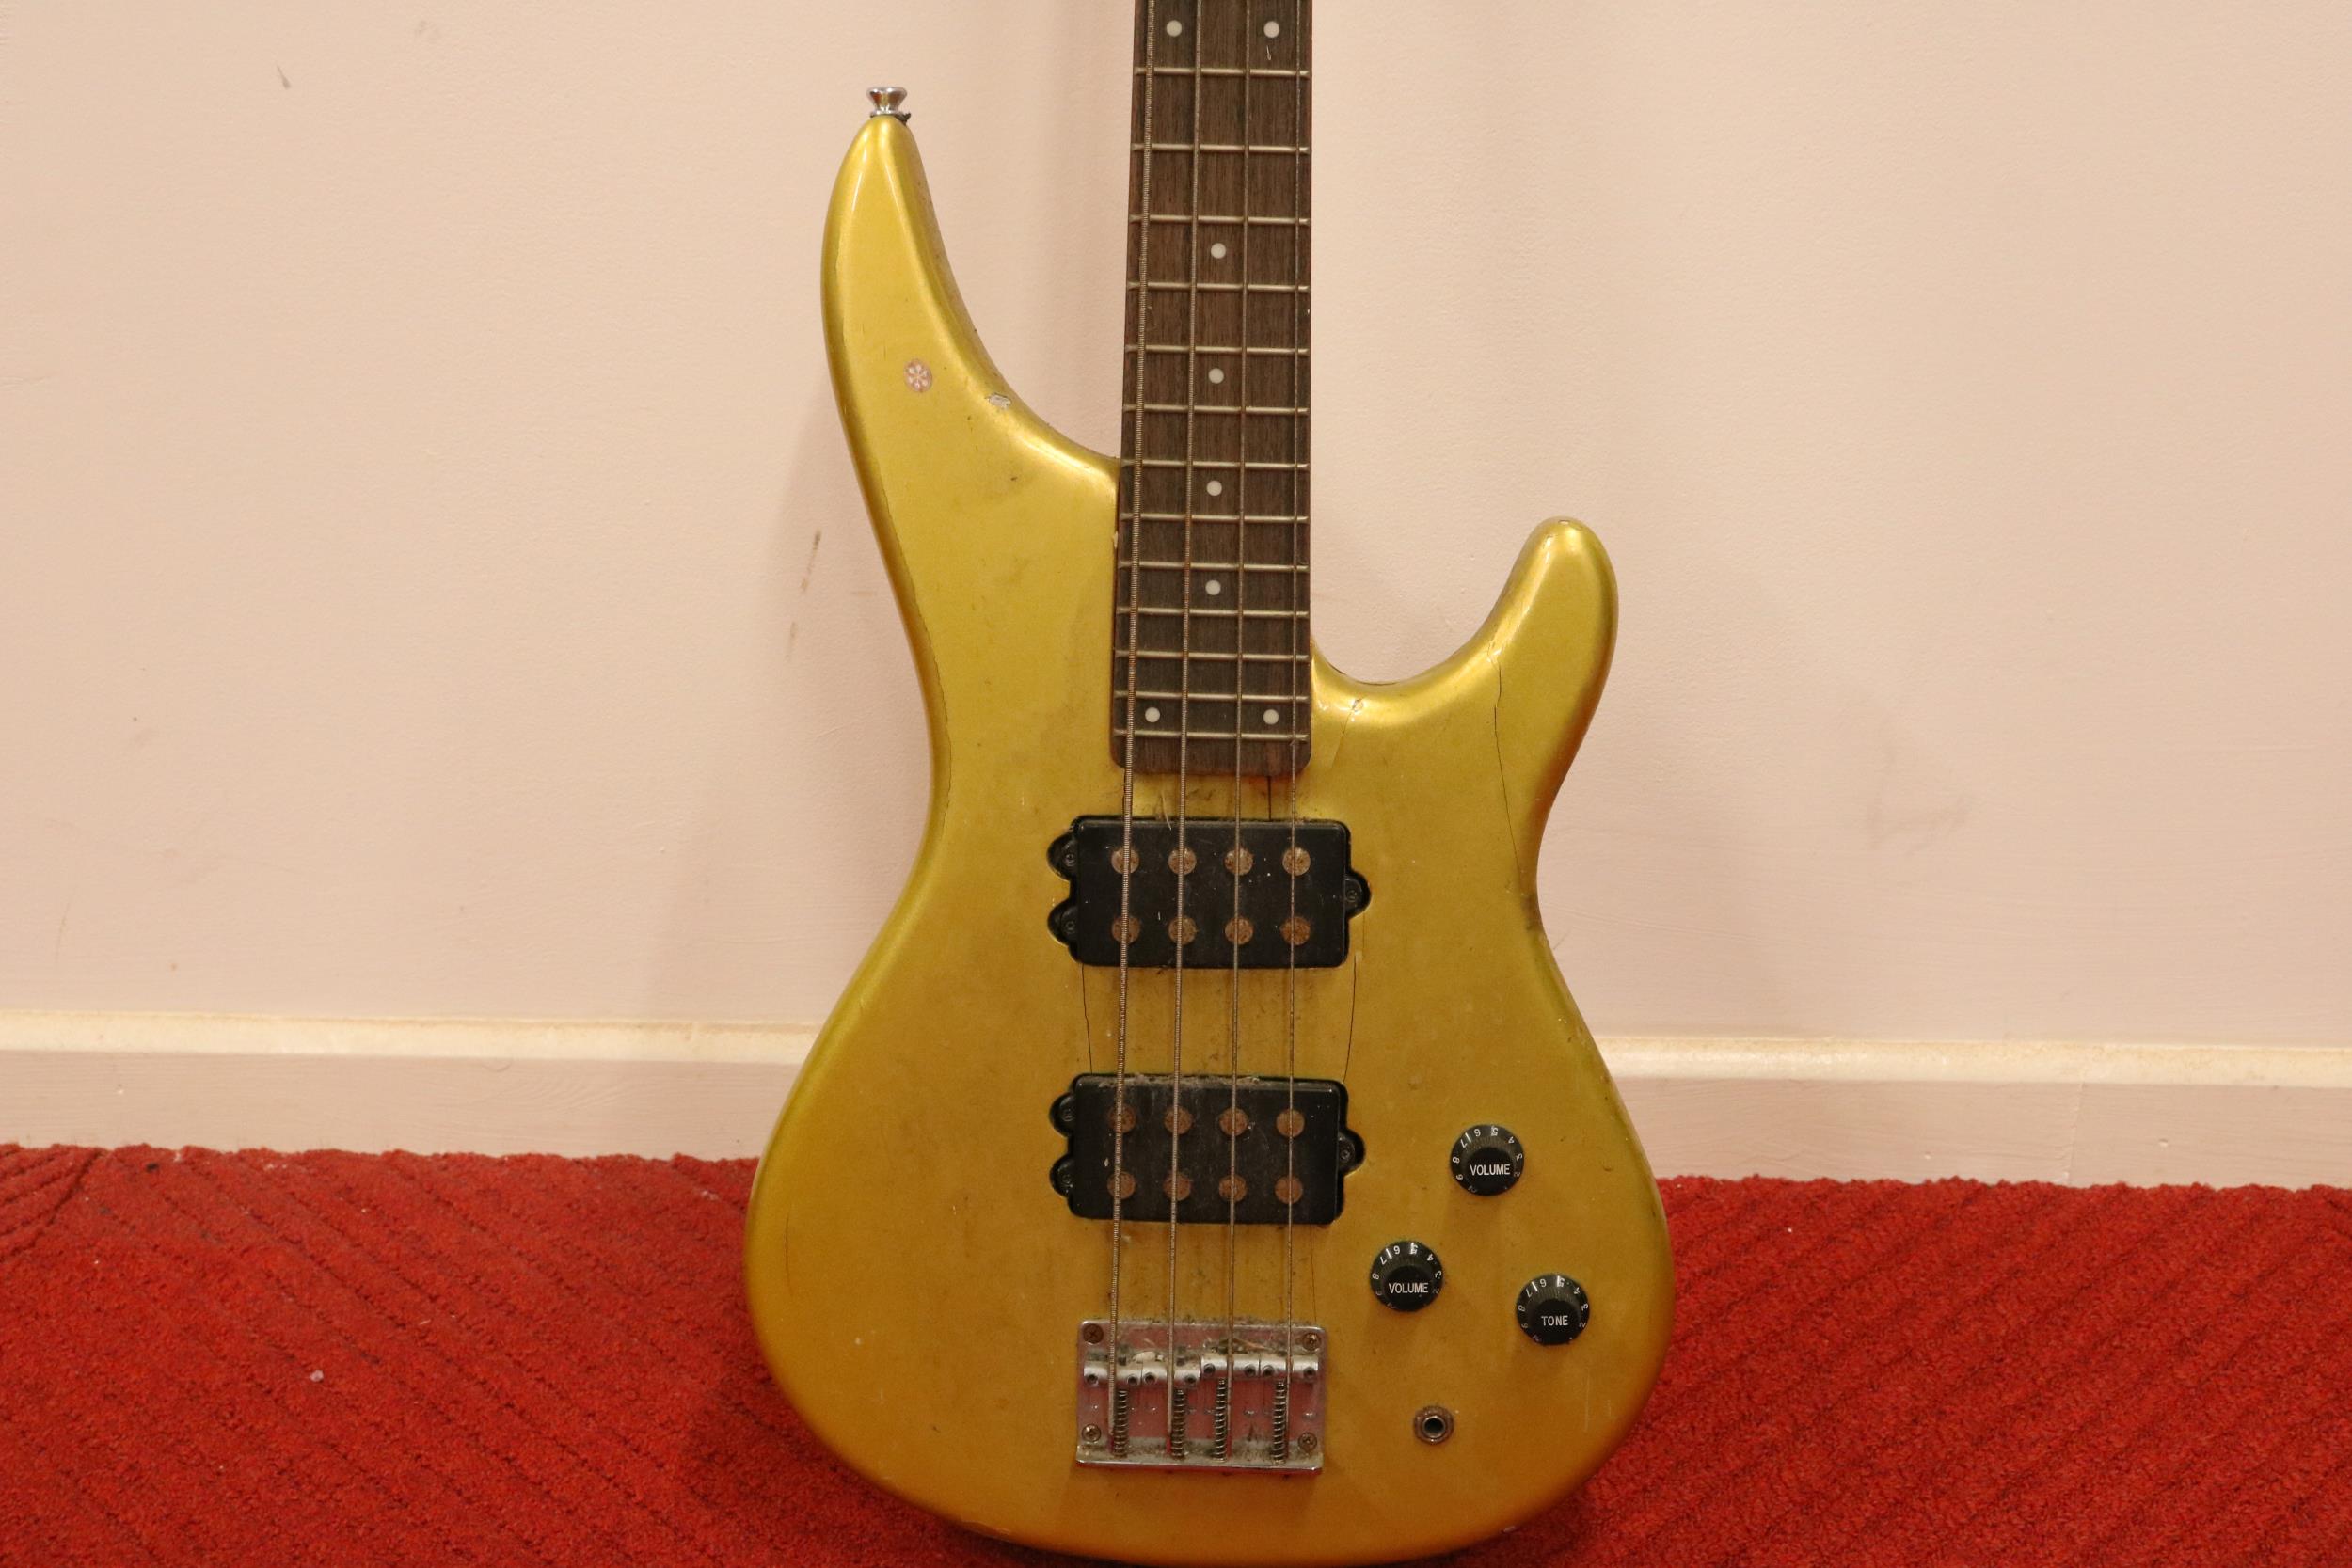 Wesley Electric Guitar Yellow Bass Double Cutaway Body 2 Pickups Glossy Finish - Image 3 of 8